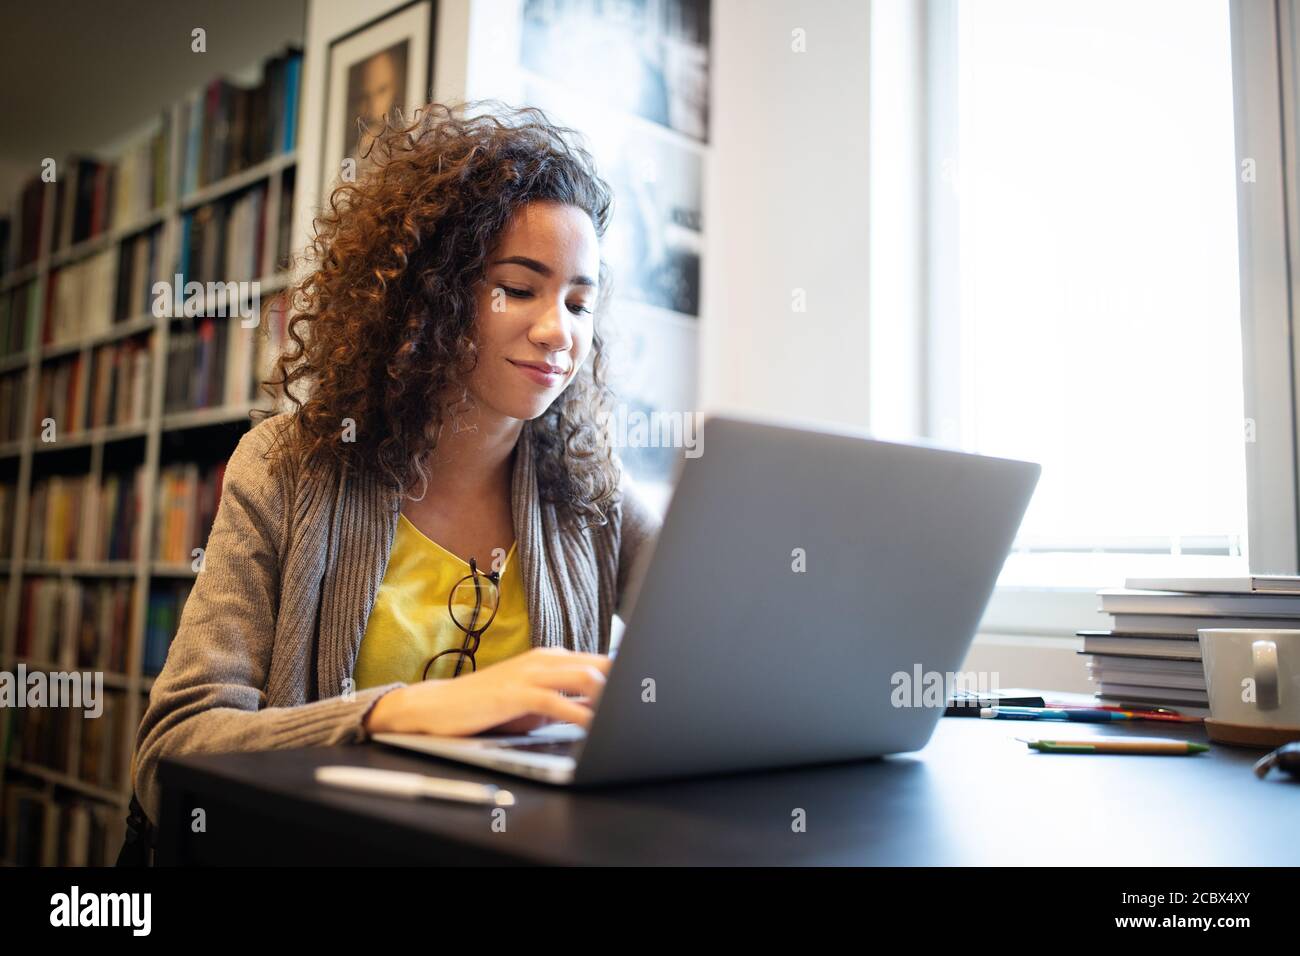 Portrait of happy student woman working on laptop Stock Photo